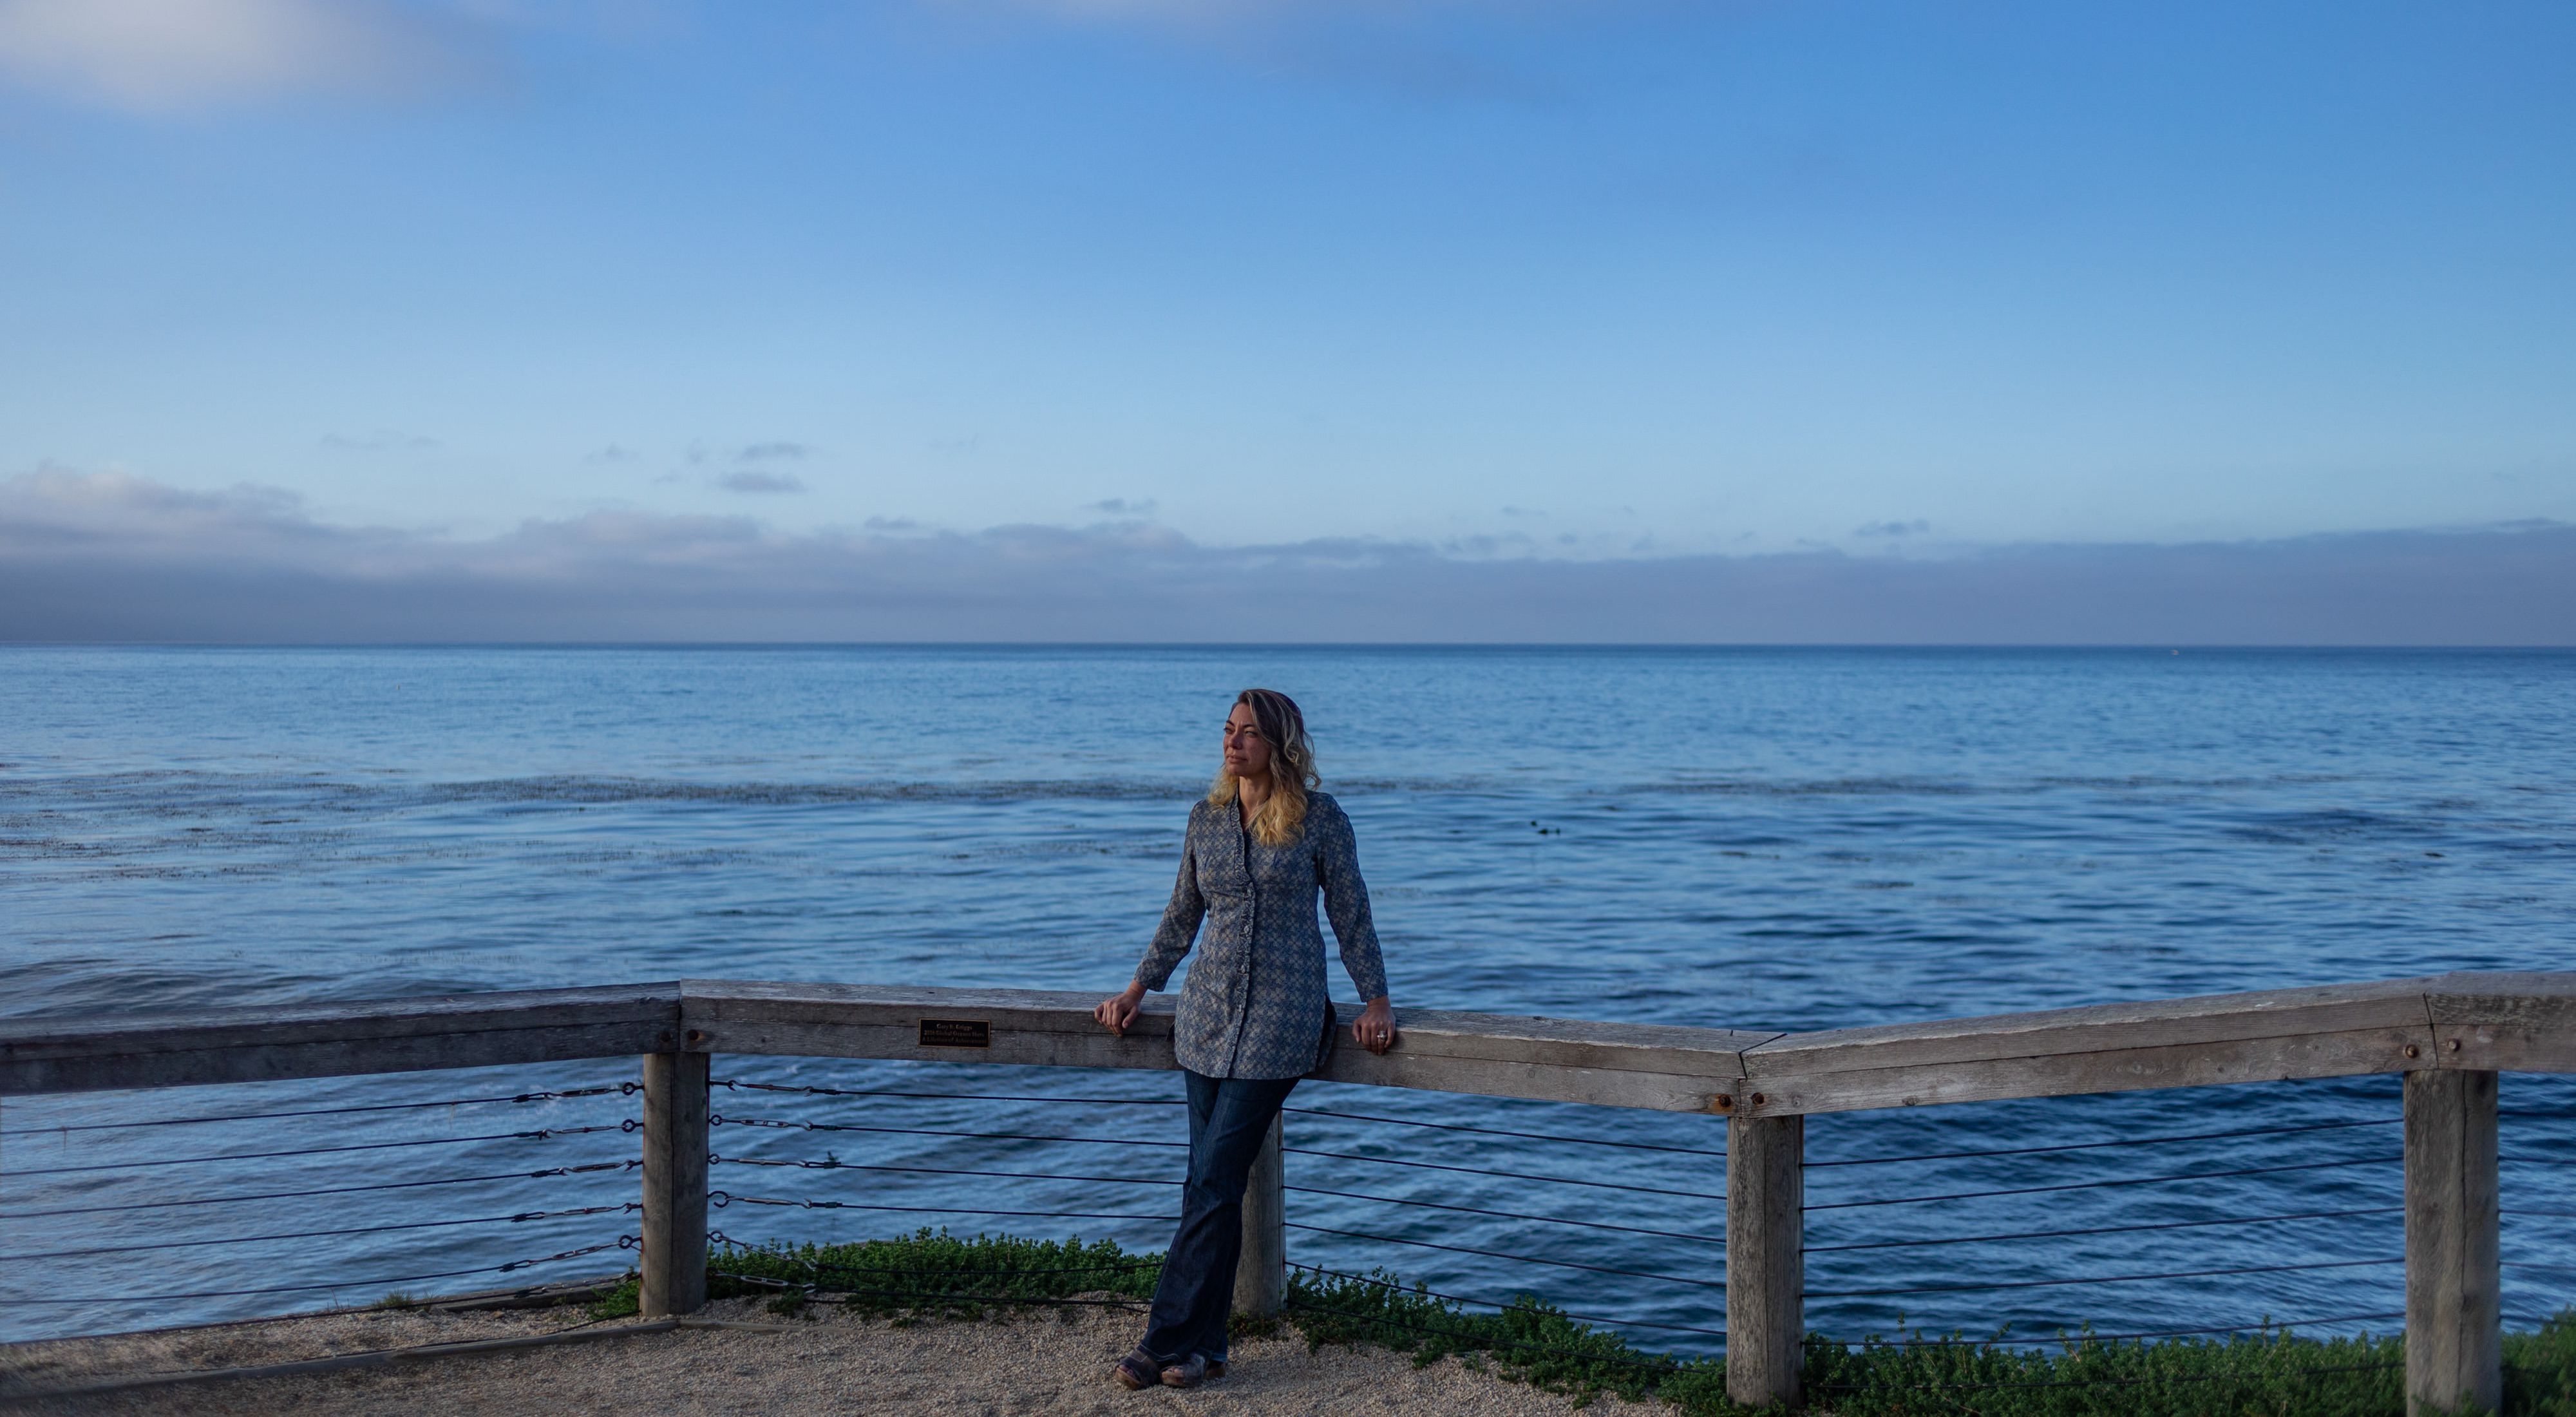 TNC scientist Heather Tallis leans against a railing facing the camera, with a vast blue Pacific Ocean horizon behind her.